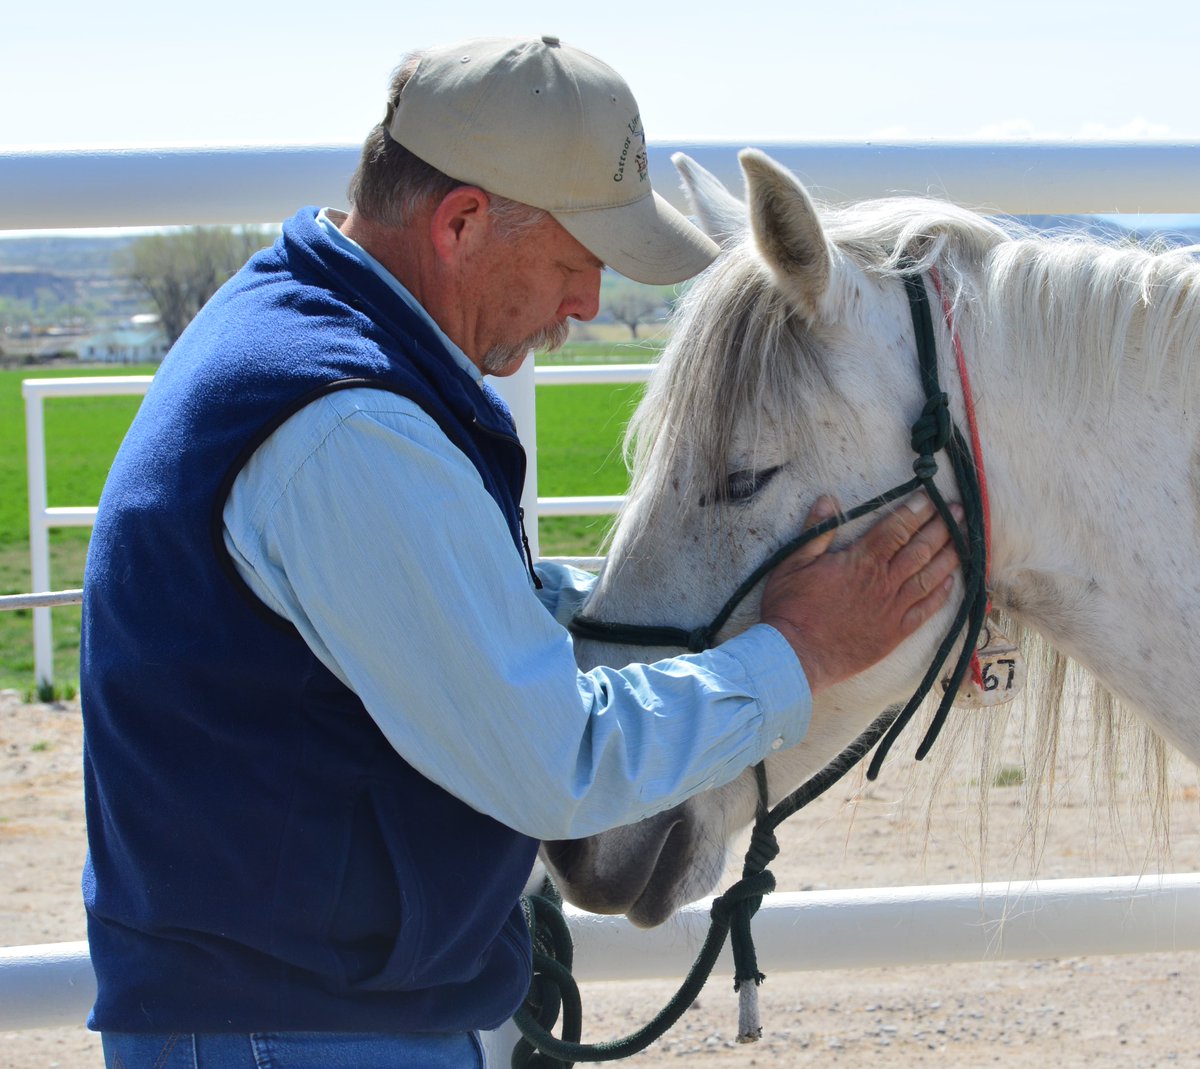 We're #NowHiring a Horse Wrangler. 📈 Pay Scale:  WG 8 💲 Salary: $26.73 - $31.18 per hour 🗺 Location: Wheatland 📌 Appointment type: Permanent   ⏰ Closes: April 25 #ApplyToday on USAJOBS: usajobs.gov/job/784061200